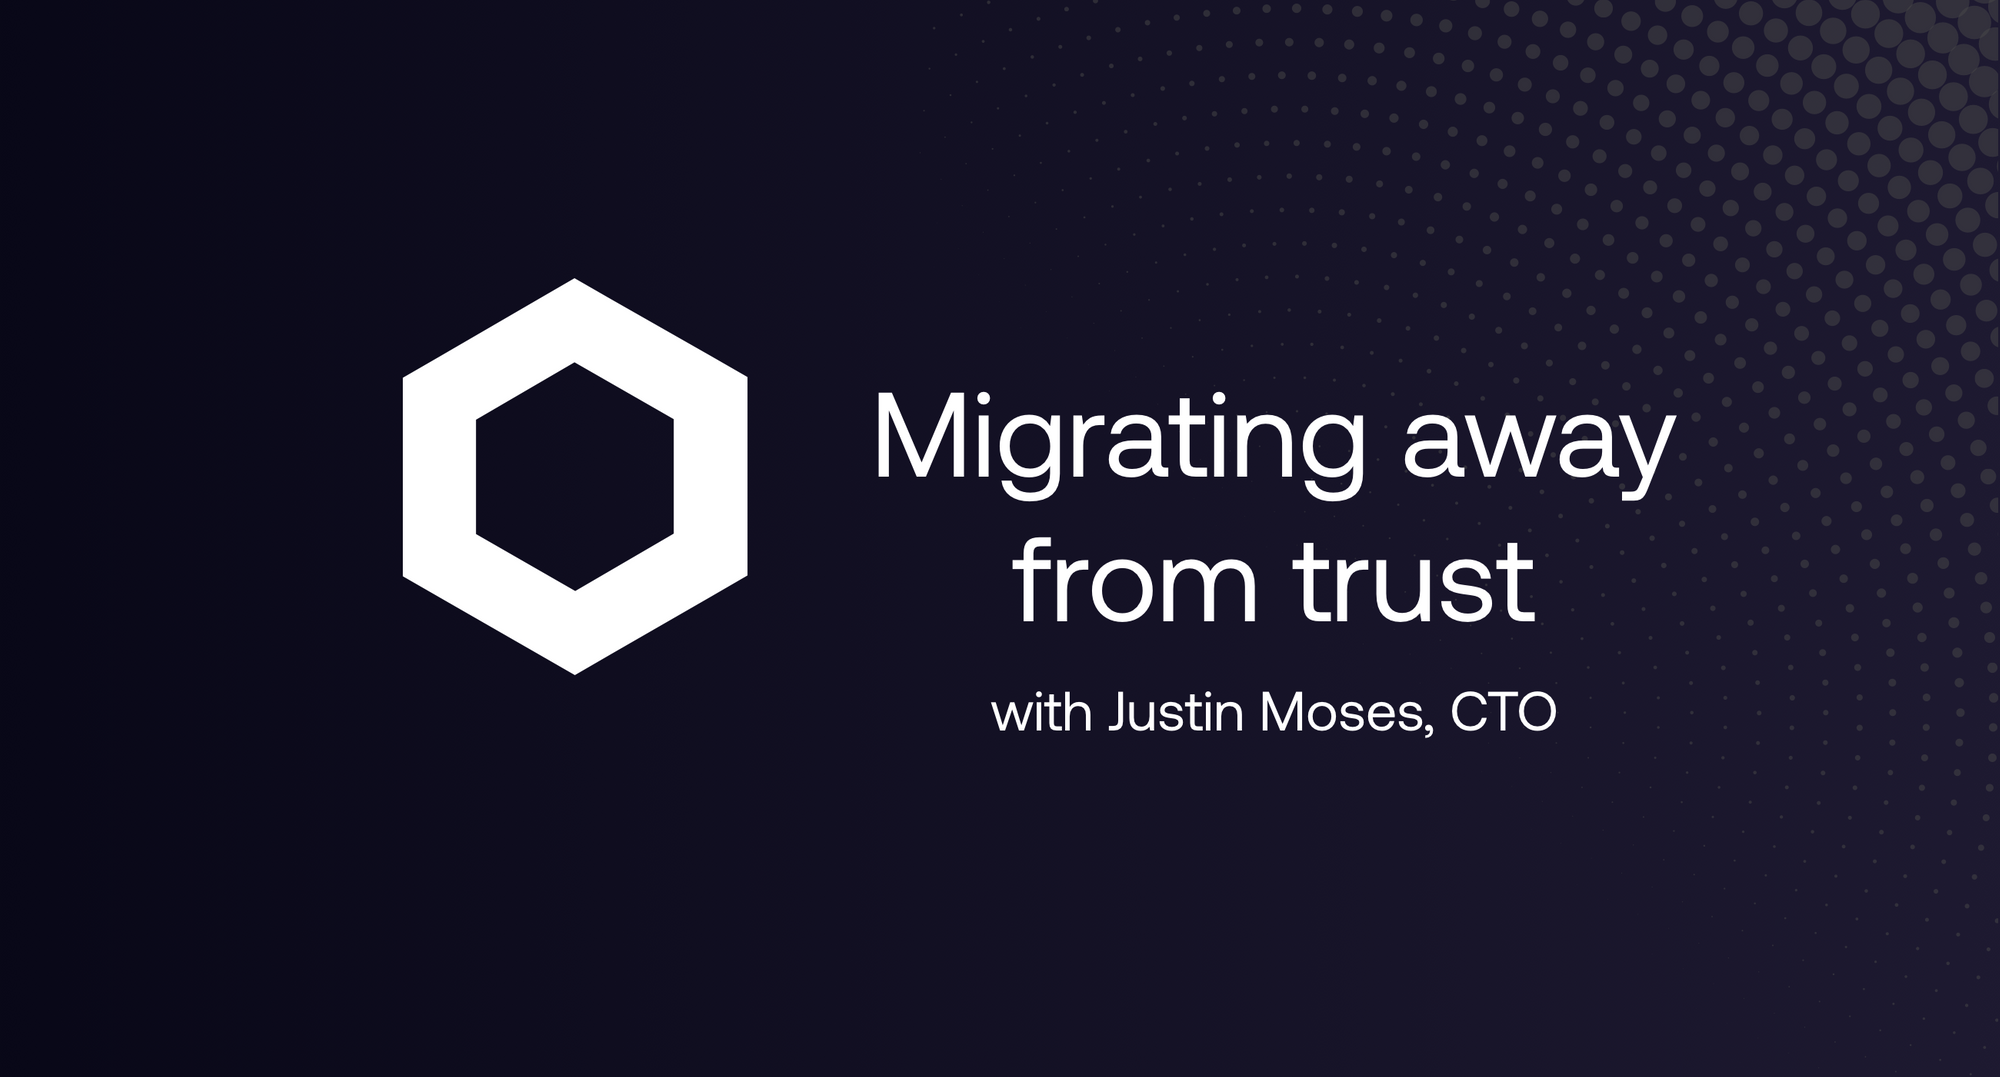 Migrating away from trust